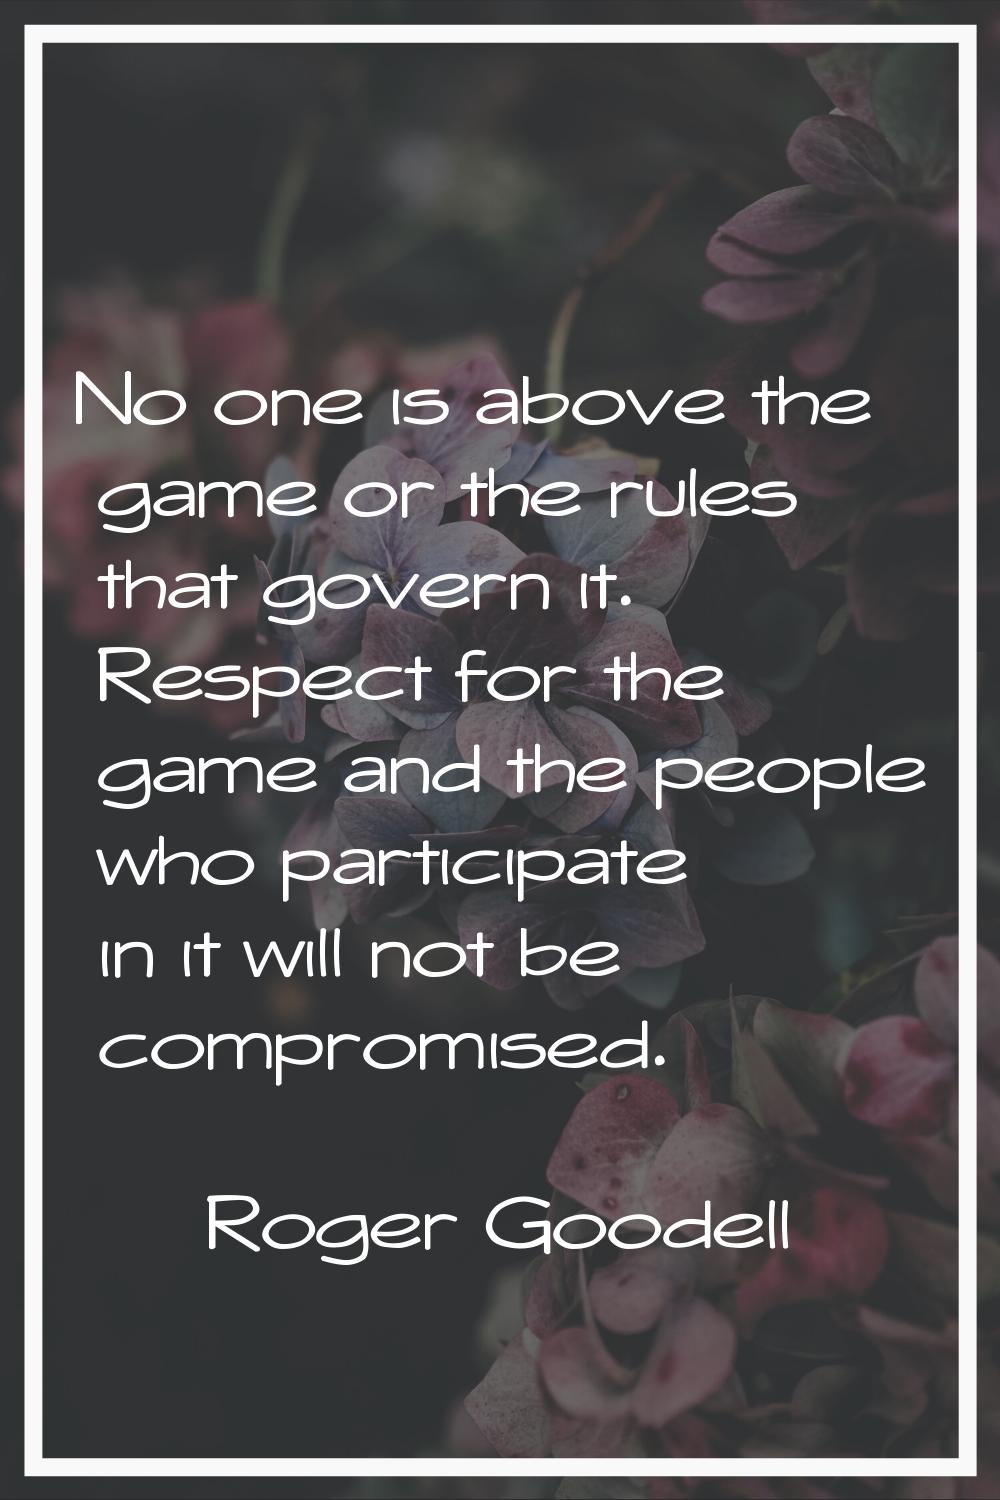 No one is above the game or the rules that govern it. Respect for the game and the people who parti